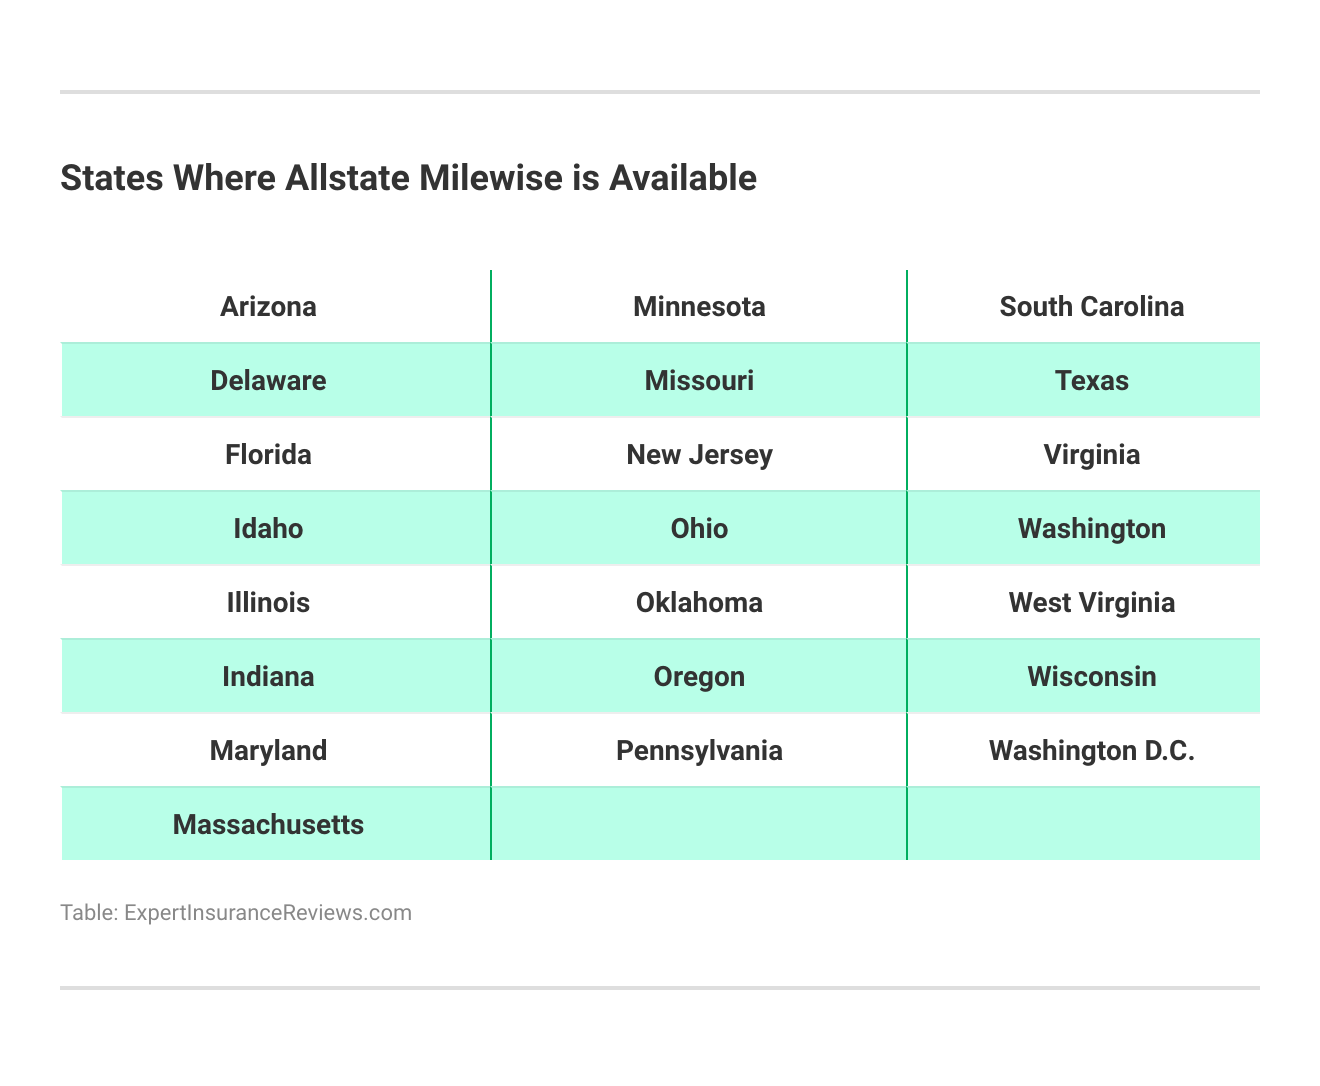 <b>States Where Allstate Milewise is Available</b>